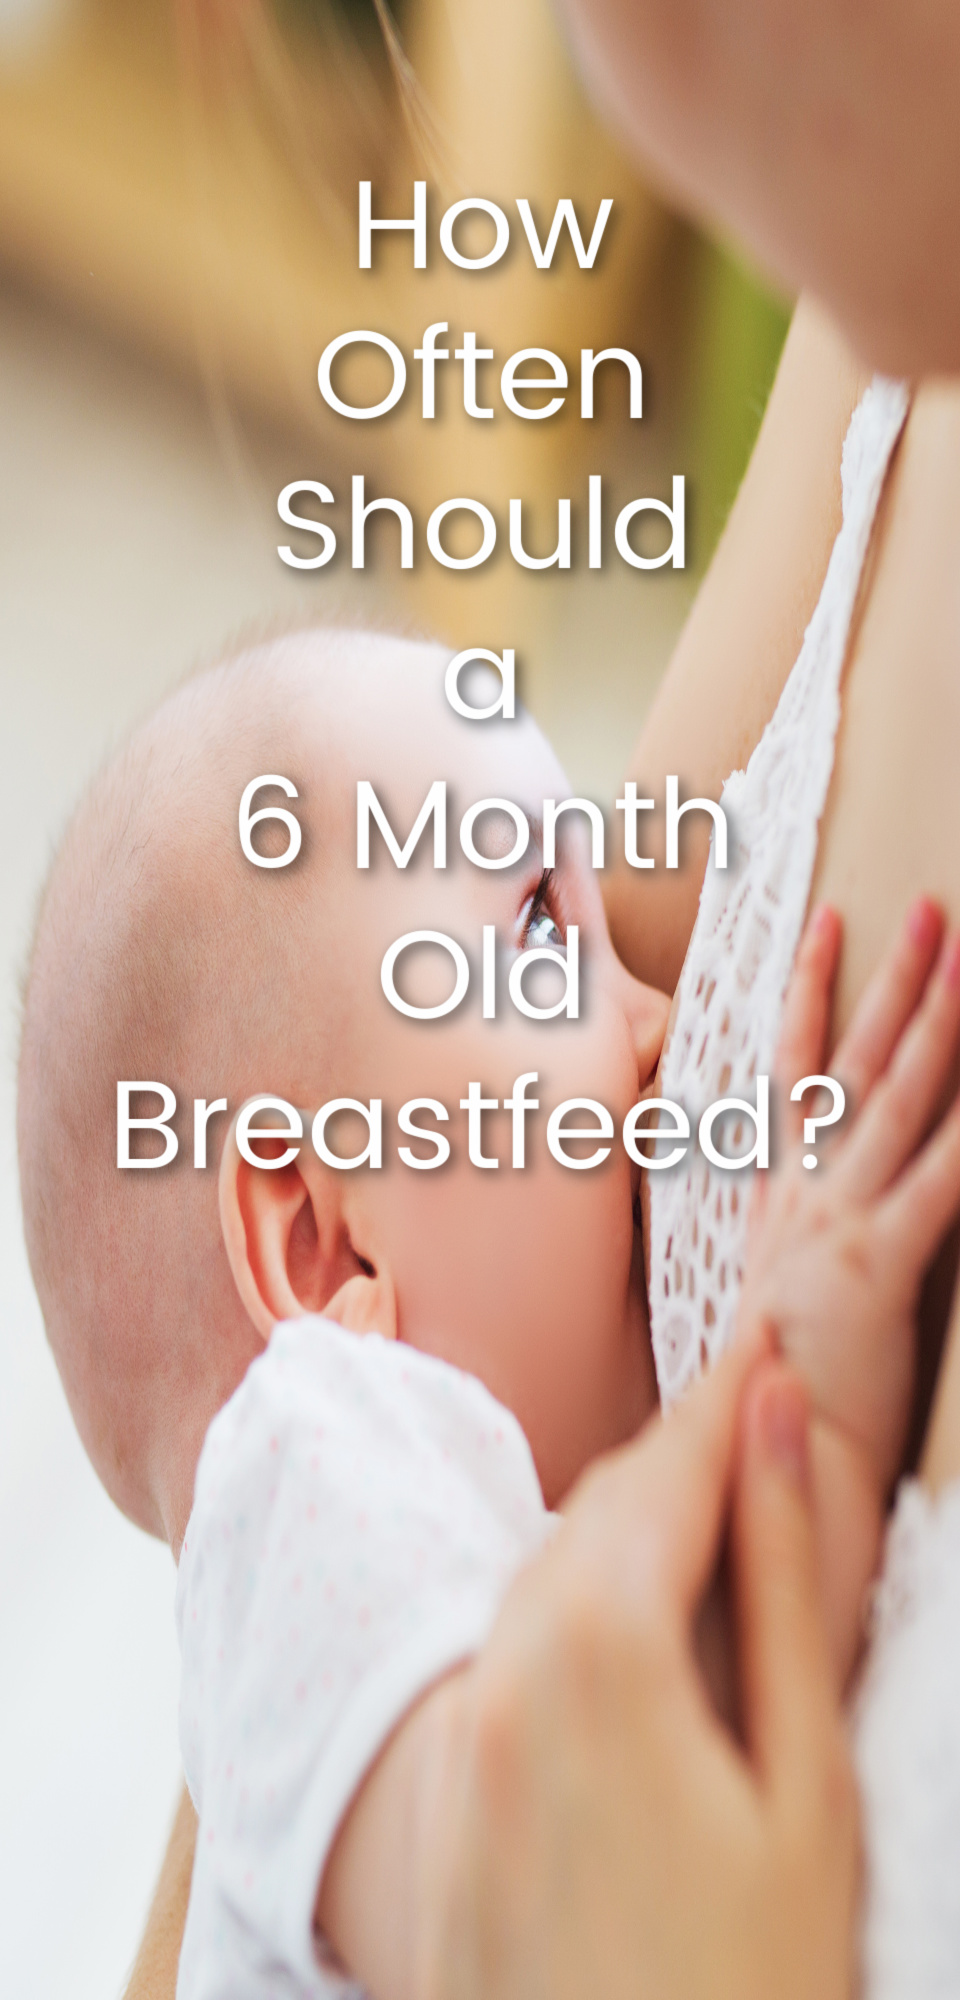 How Often Should A 6 Month Old Breastfeed?